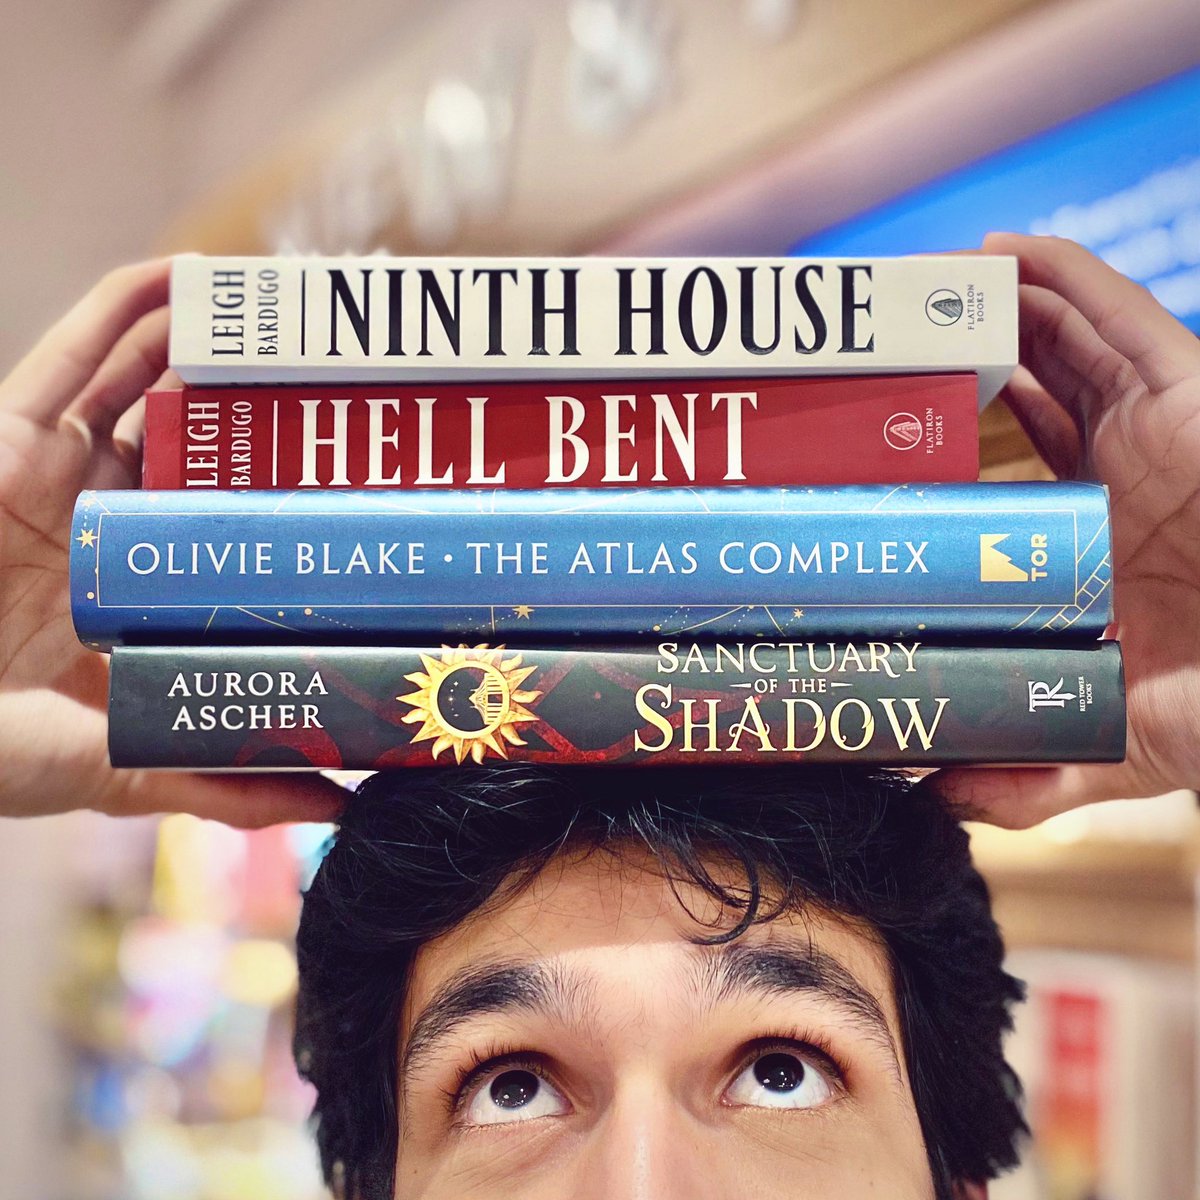 This week’s #NewReleaseTuesday includes all new Barnes & Noble Exclusive editions of #NinthHouse & #HellBent, plus new #OlivieBlake! Very exciting news for fans of fantasy & sci-fi… ✨🔮
.
.
.

#leighbardugo #fantasy #scifi #fantasybooks #sanctuaryoftheshadow #auroraascher